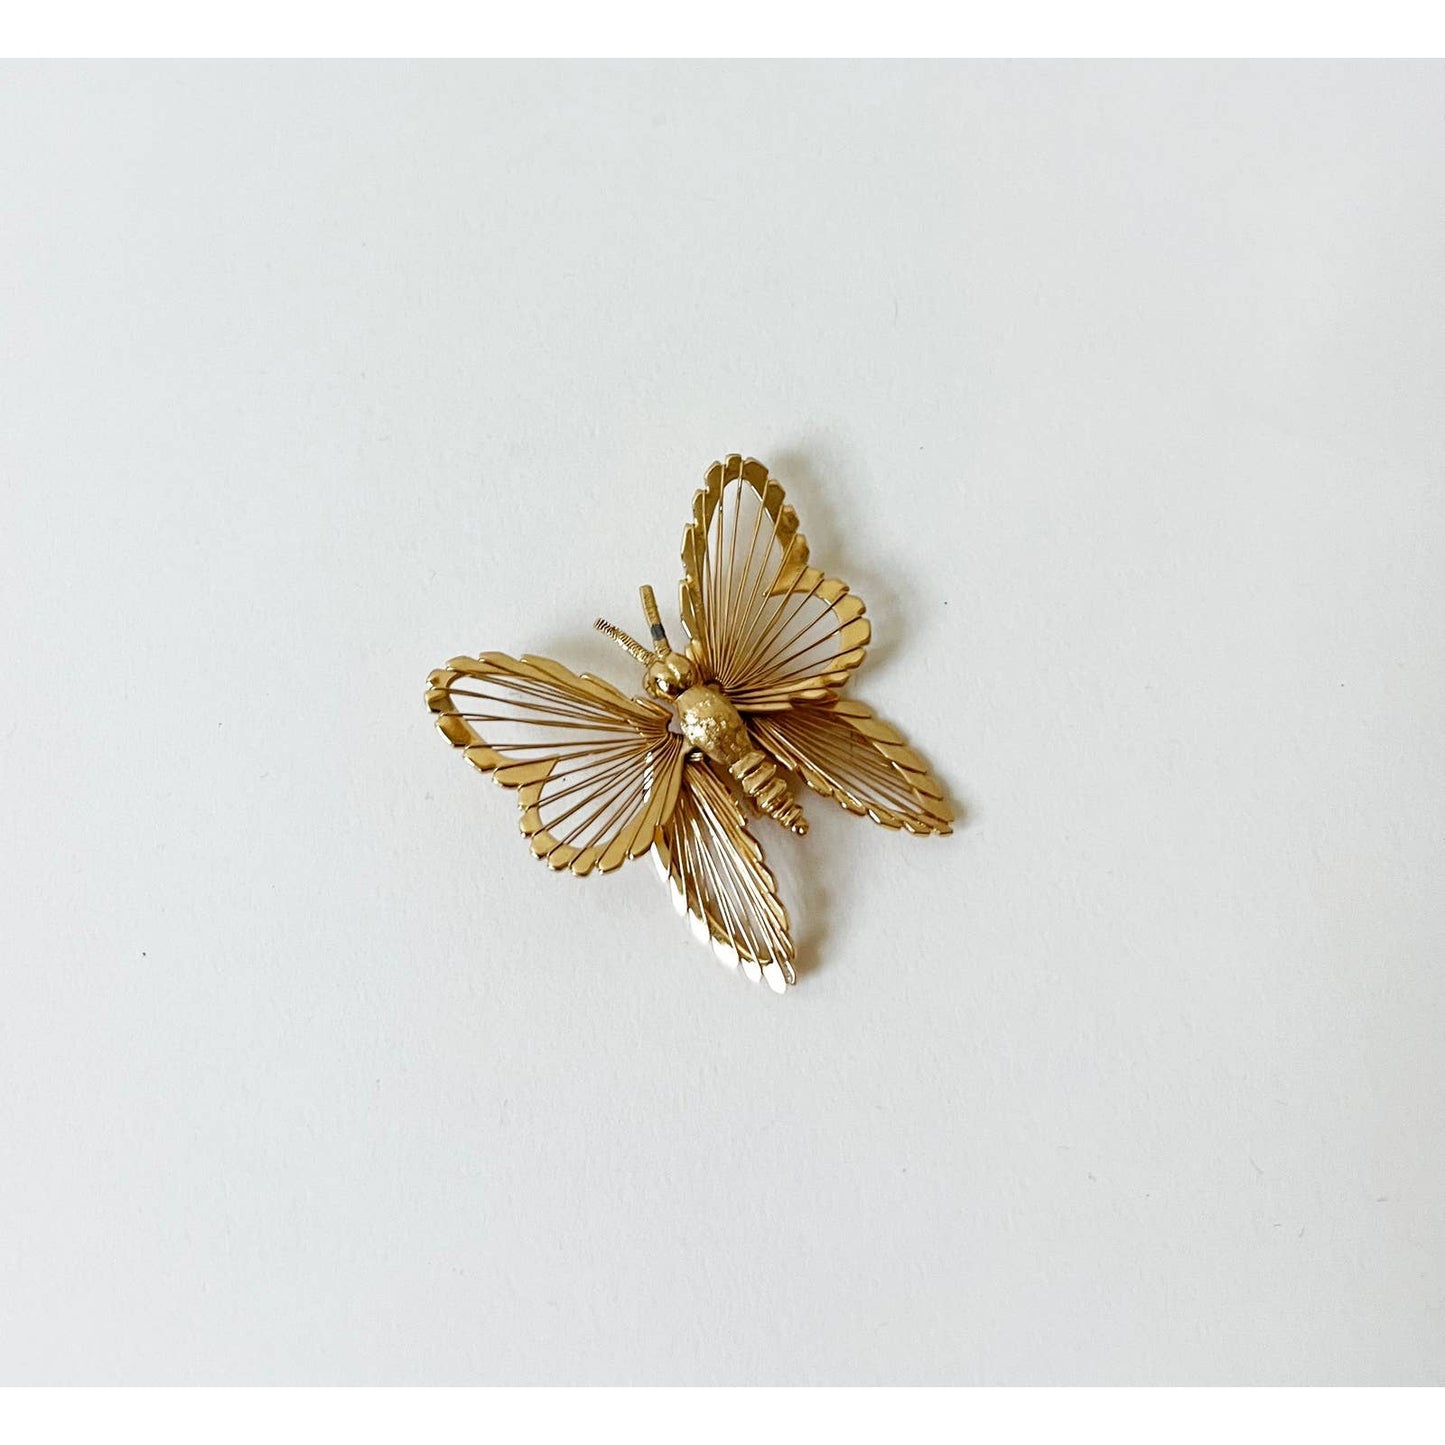 Vintage Gold Tone Butterfly Monet Pin Brooch